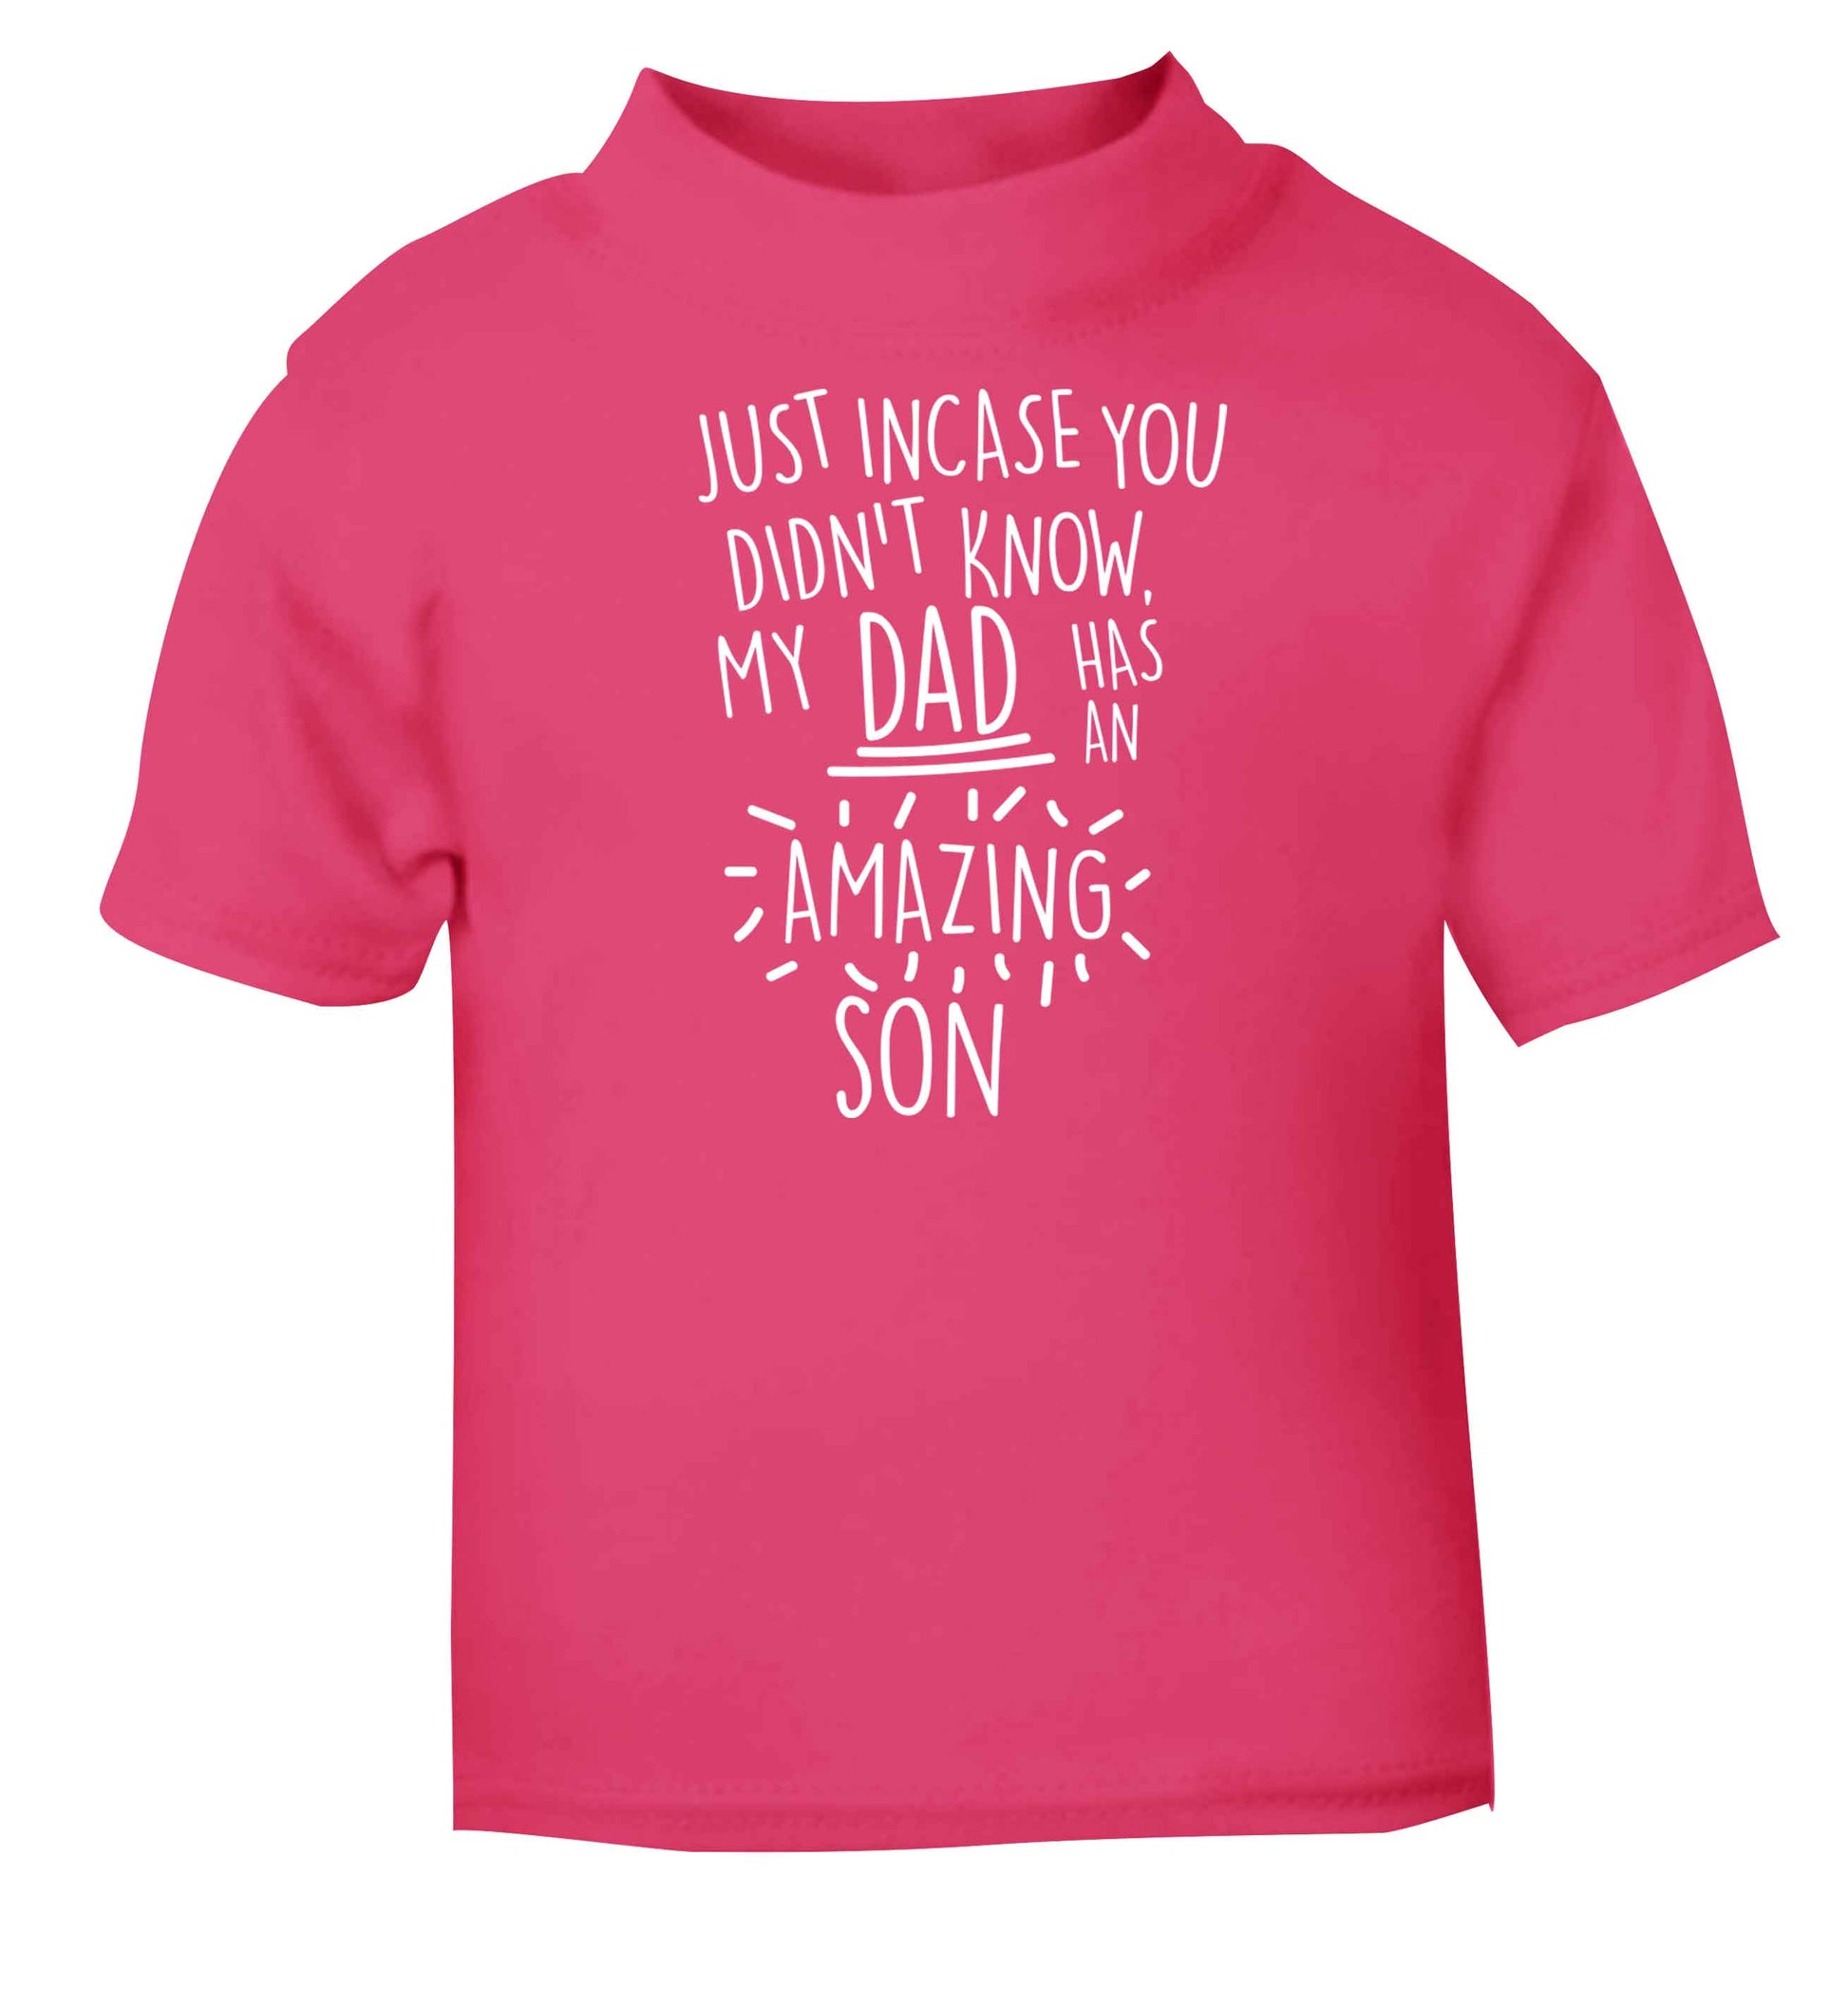 Just incase you didn't know my dad has an amazing son pink baby toddler Tshirt 2 Years